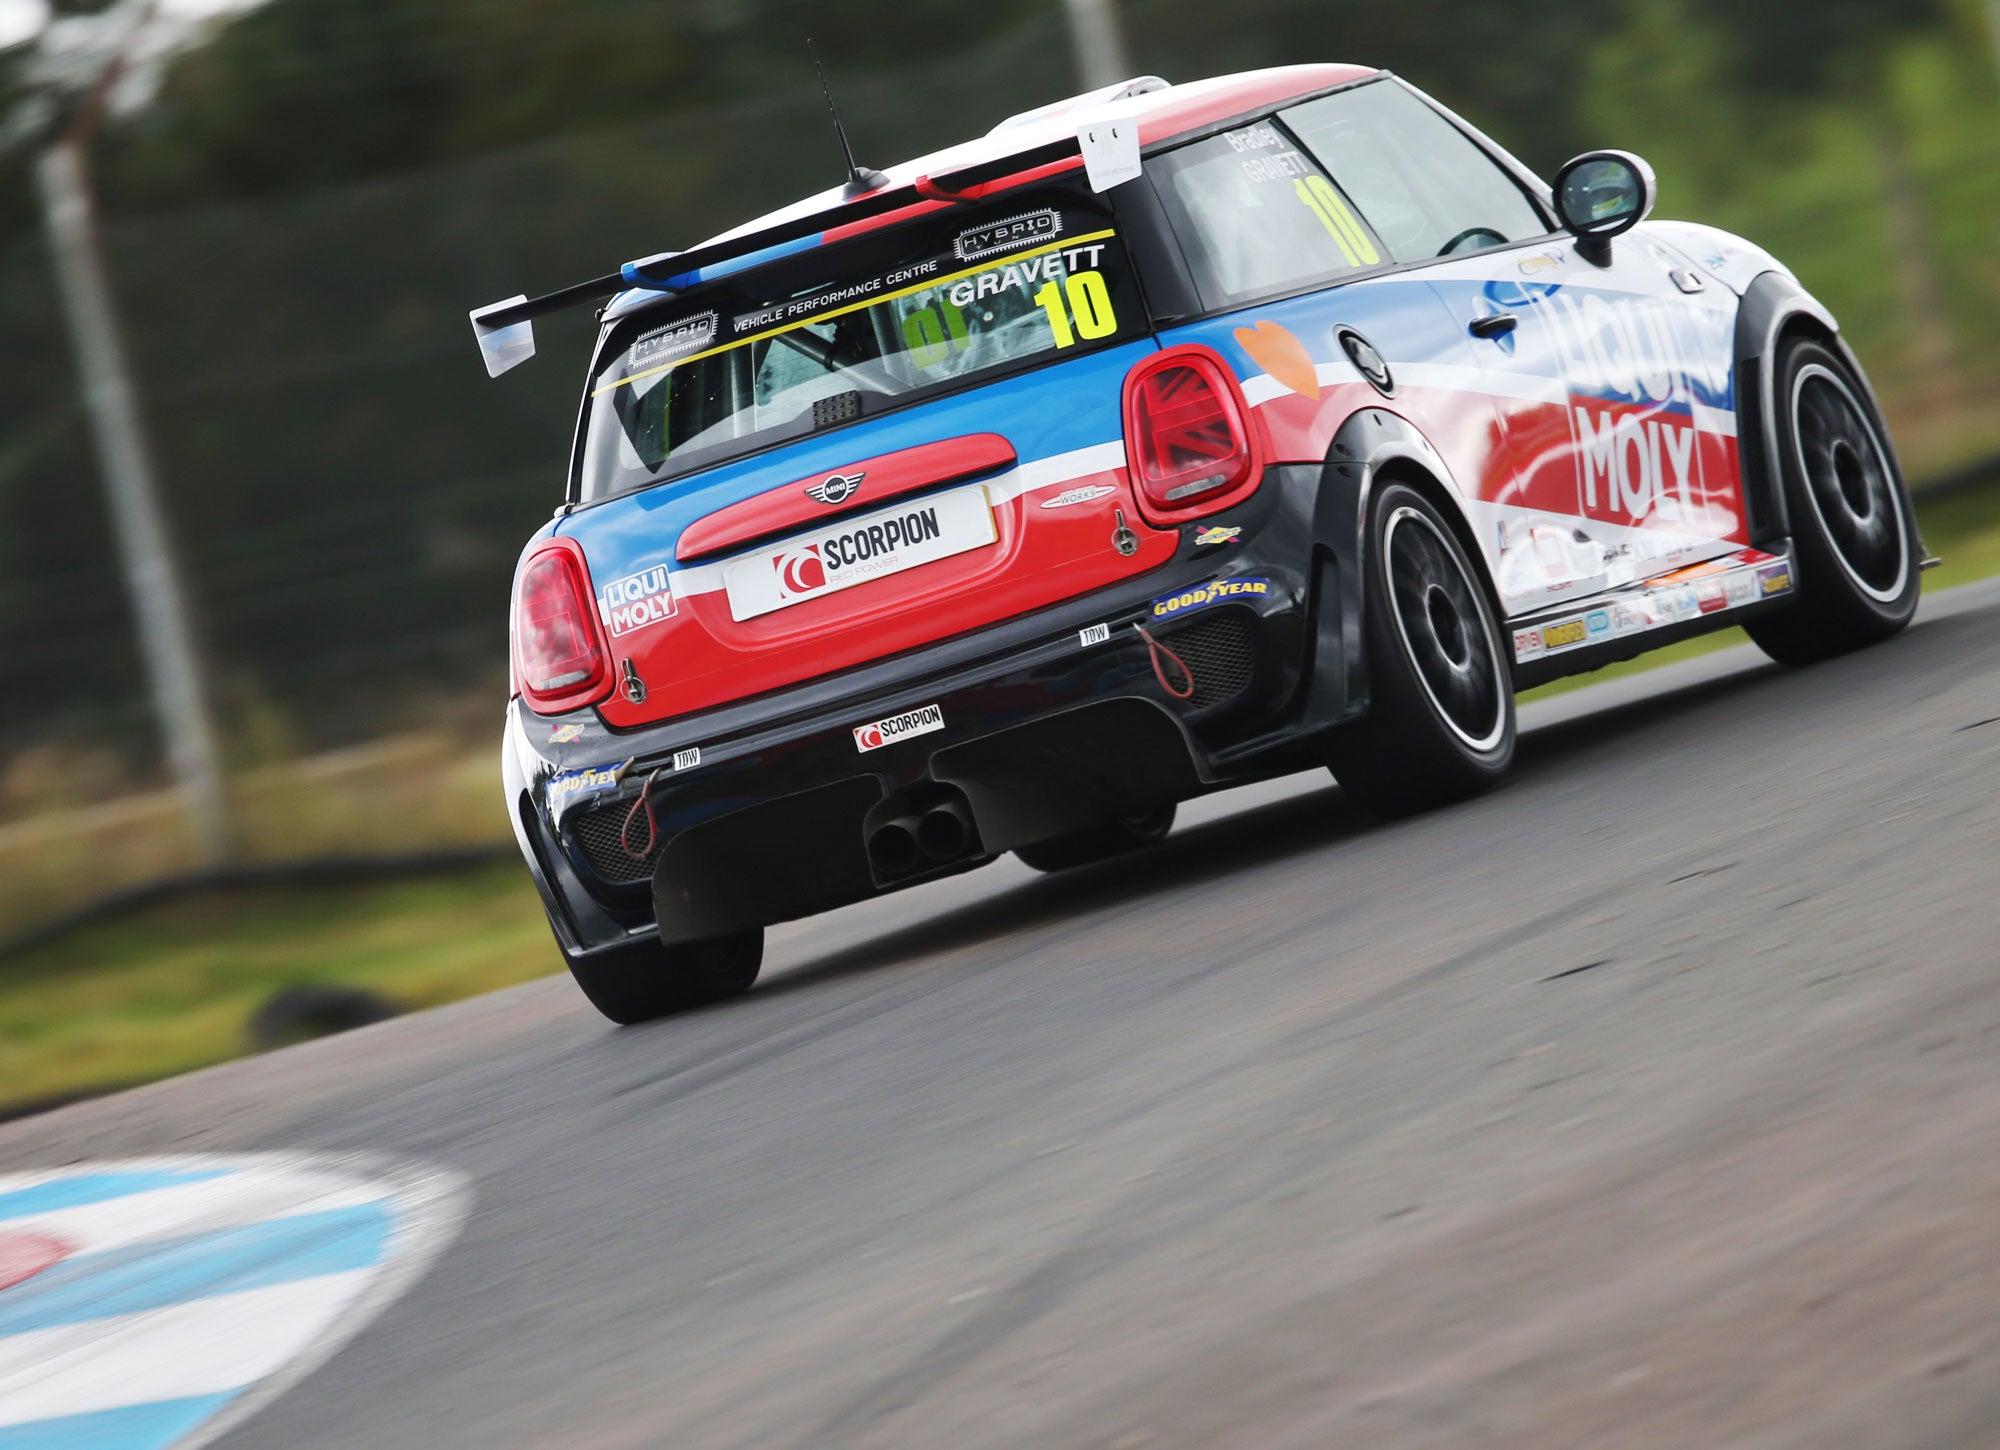 Bradley Gravett son of BTCC British Touring Car Champion Robb Gravett in the MINI Challenge JCW Series at Knockhill in 2021 Through the Chicane Graves Motorsport Cooper Racing Driver LIQUI MOLY LM Performance Thinking it Better